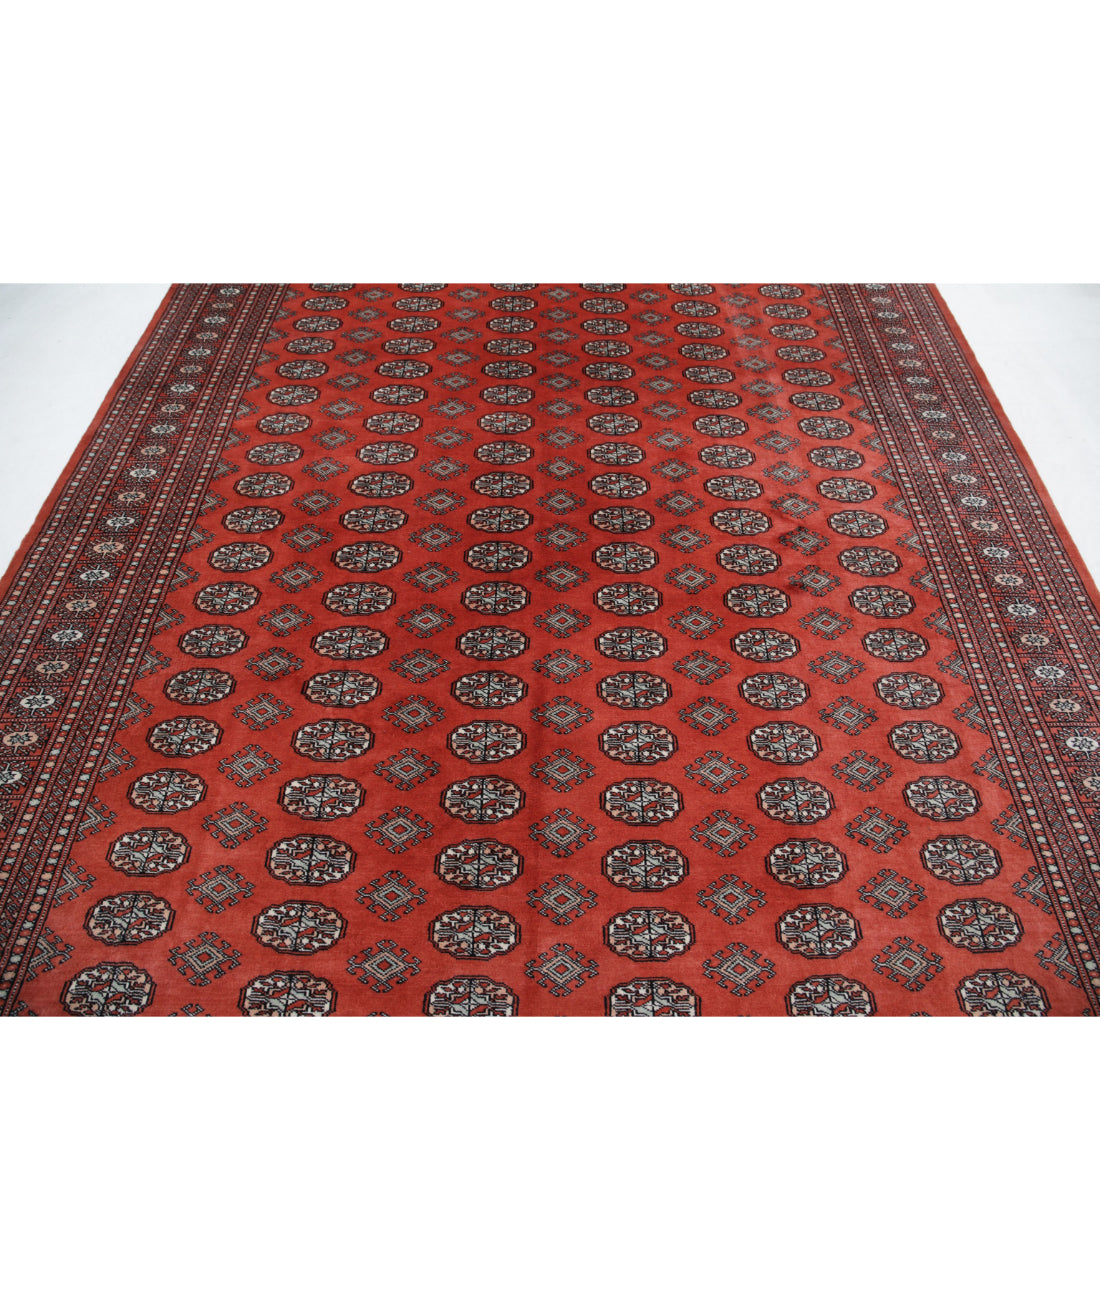 Hand Knotted Tribal Bokhara Wool Rug - 8'1'' x 10'1'' 8'1'' x 10'1'' (243 X 303) / Rust / Ivory